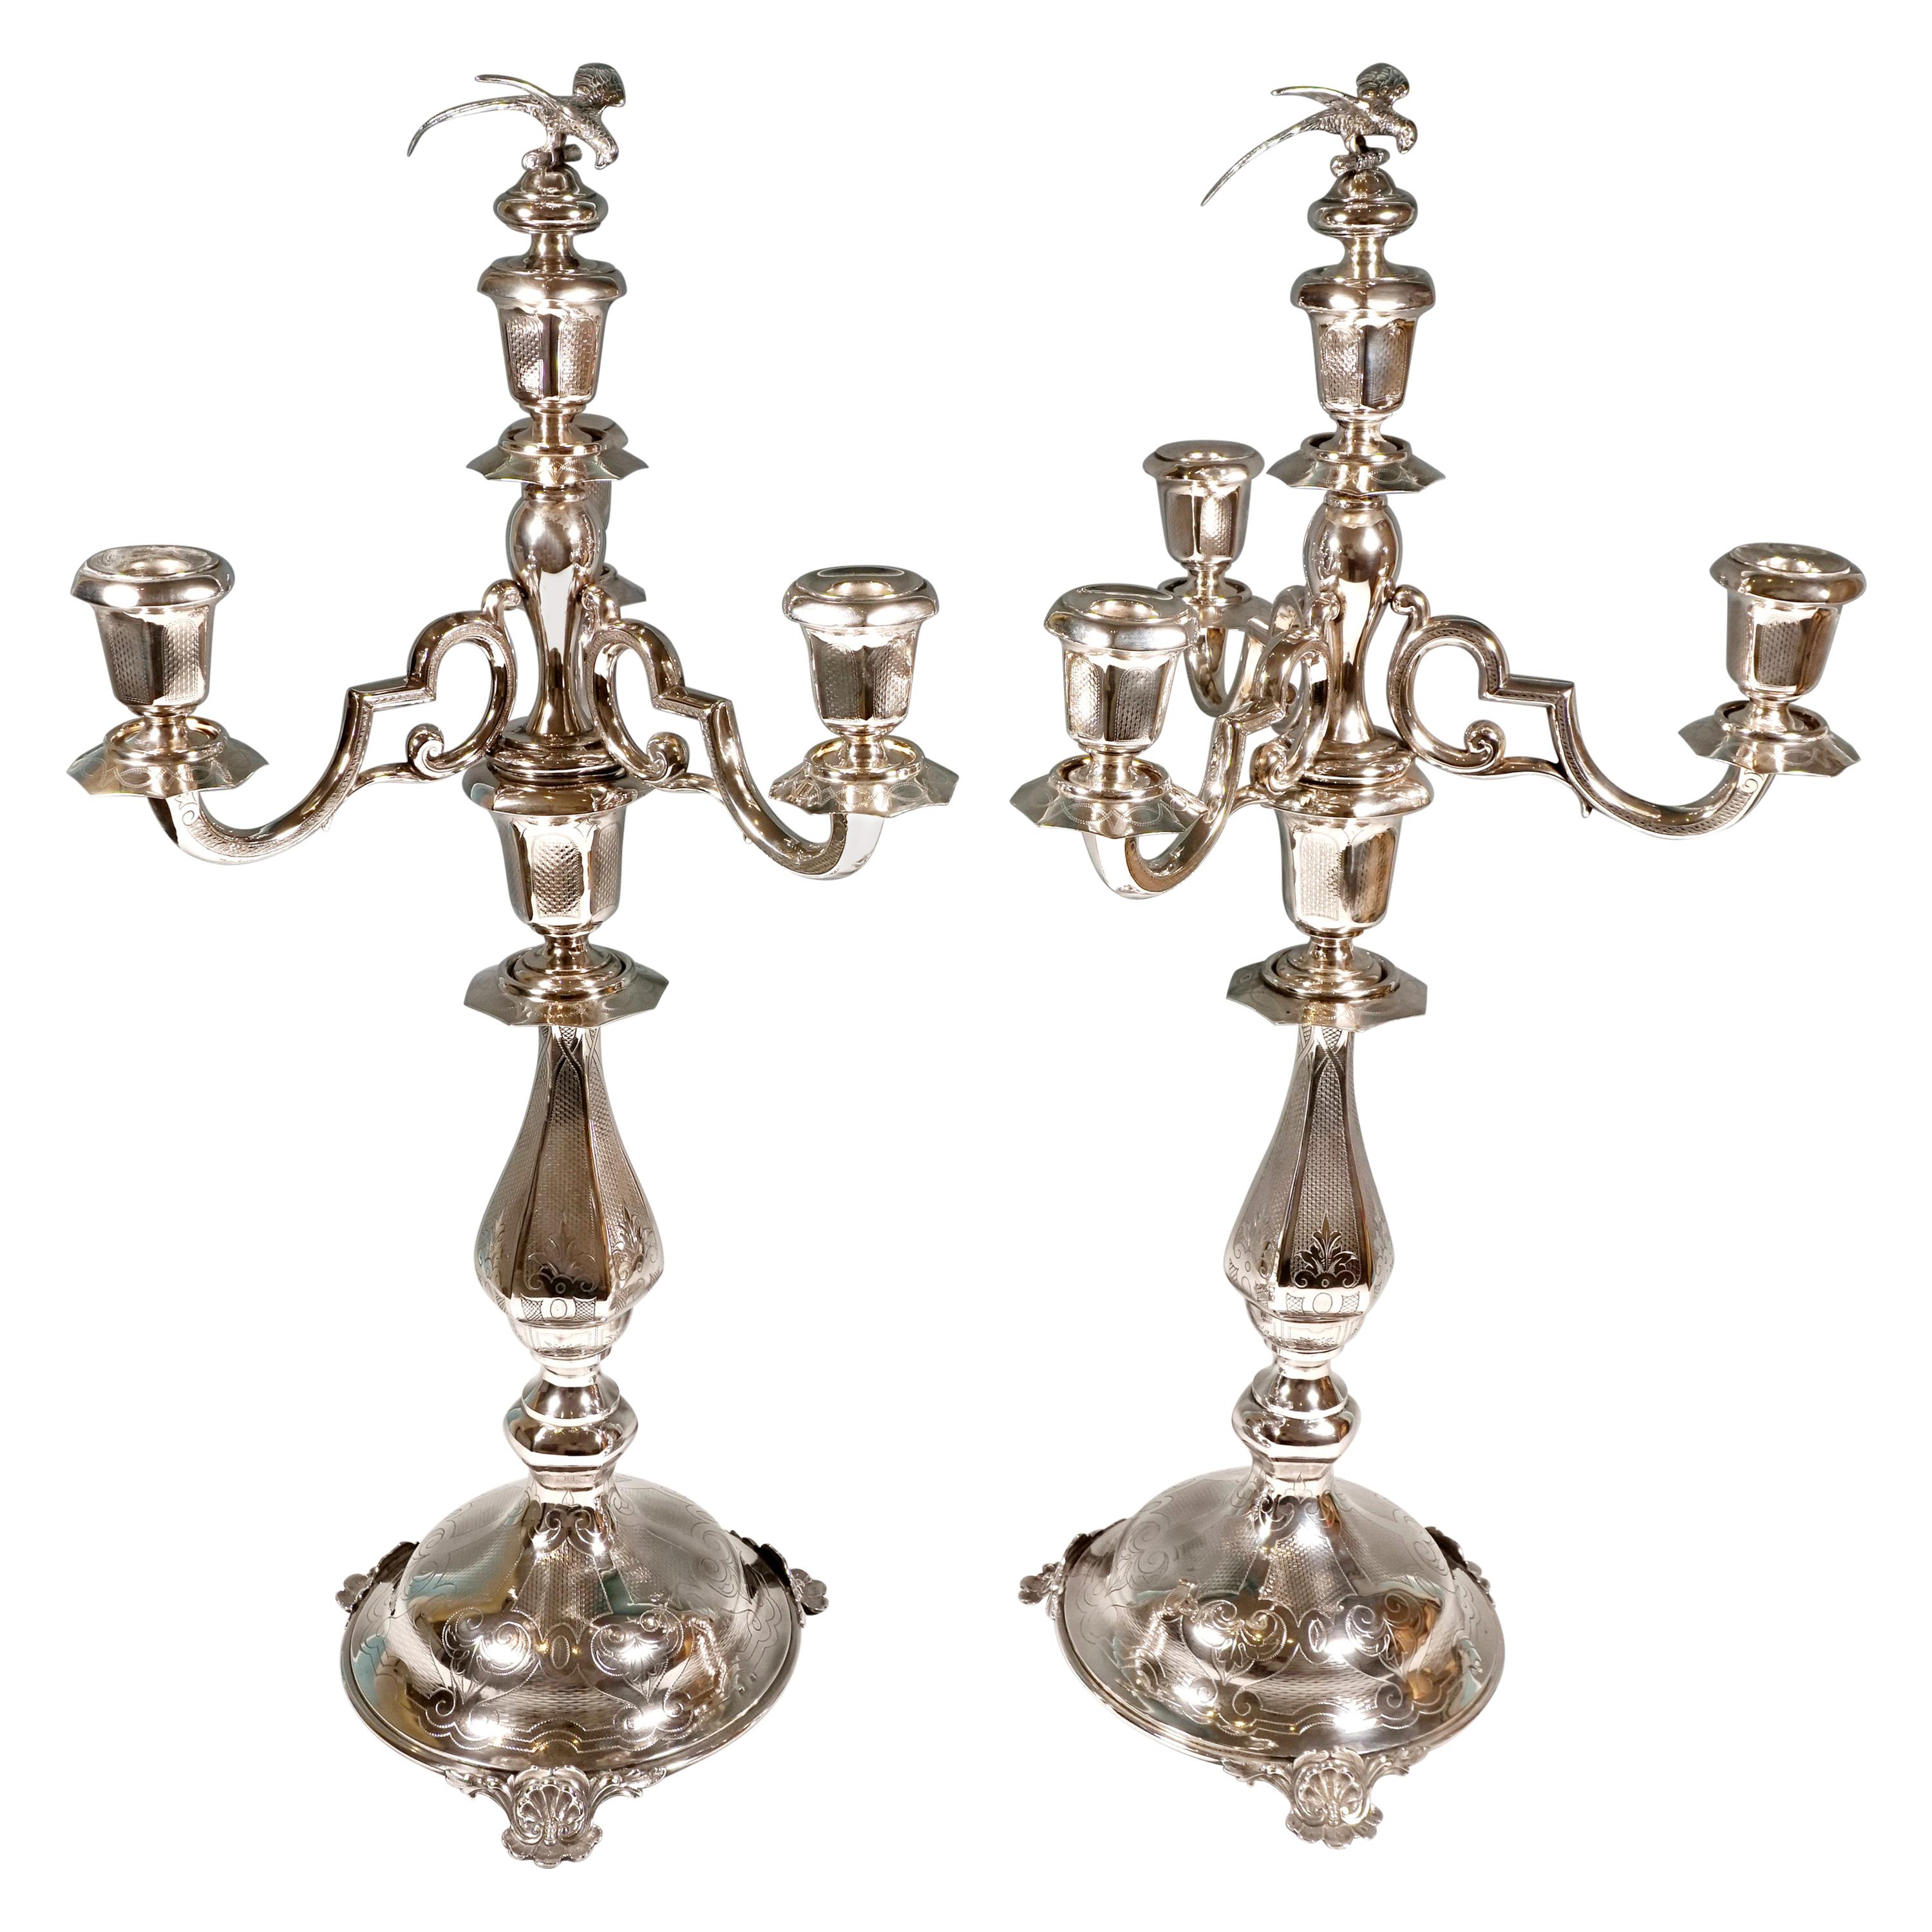 Pair of Tall Viennese Silver Art Nouveau 4-Flame Candelabras by Eberl & Co, 1920